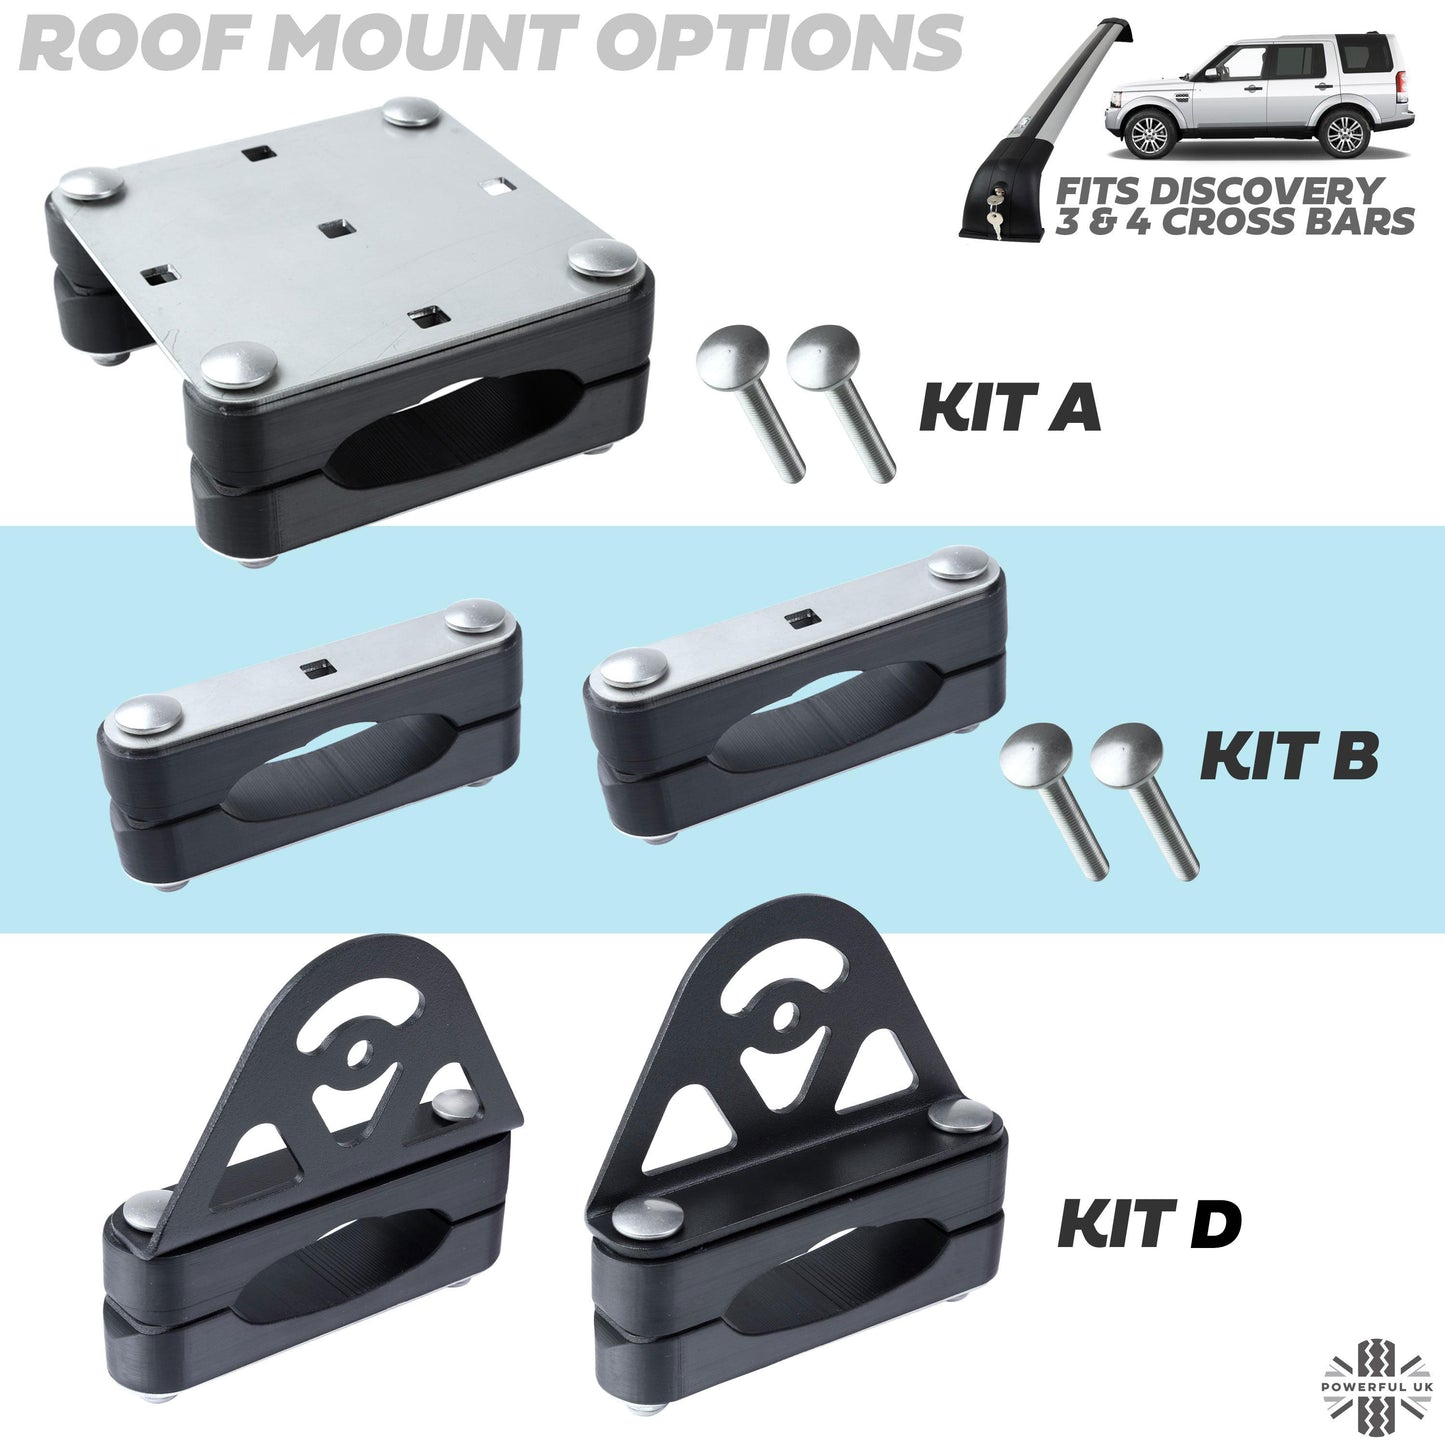 Roof Cross Bar Mount Clamp Kit for the Land Rover Discovery 3&4 - Kit A - Stainless Steel Top